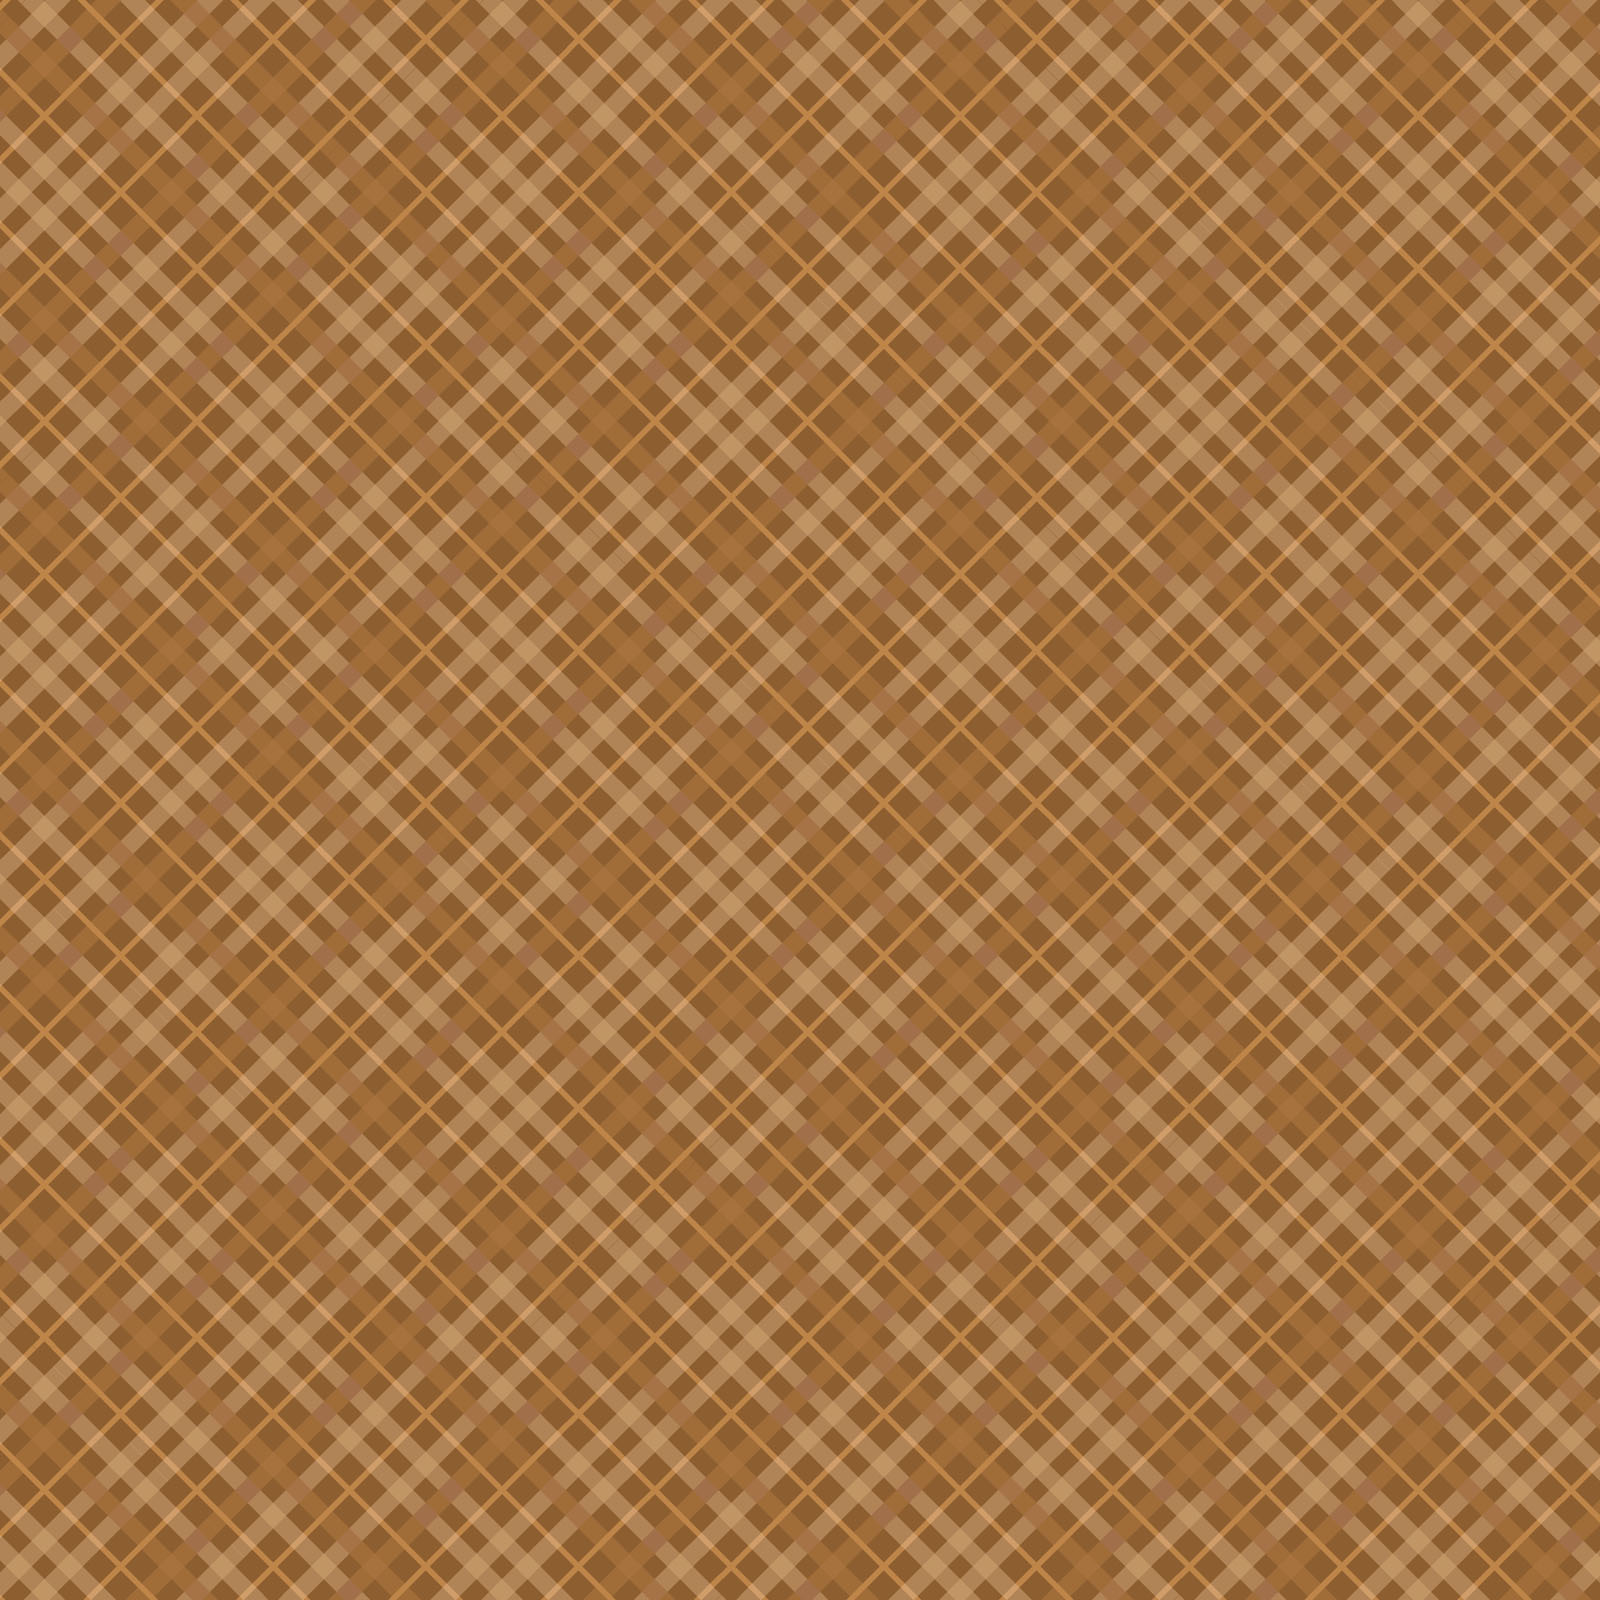 Core'dinations • Patterned single-sided 30,5x30,5cm Brown plaid